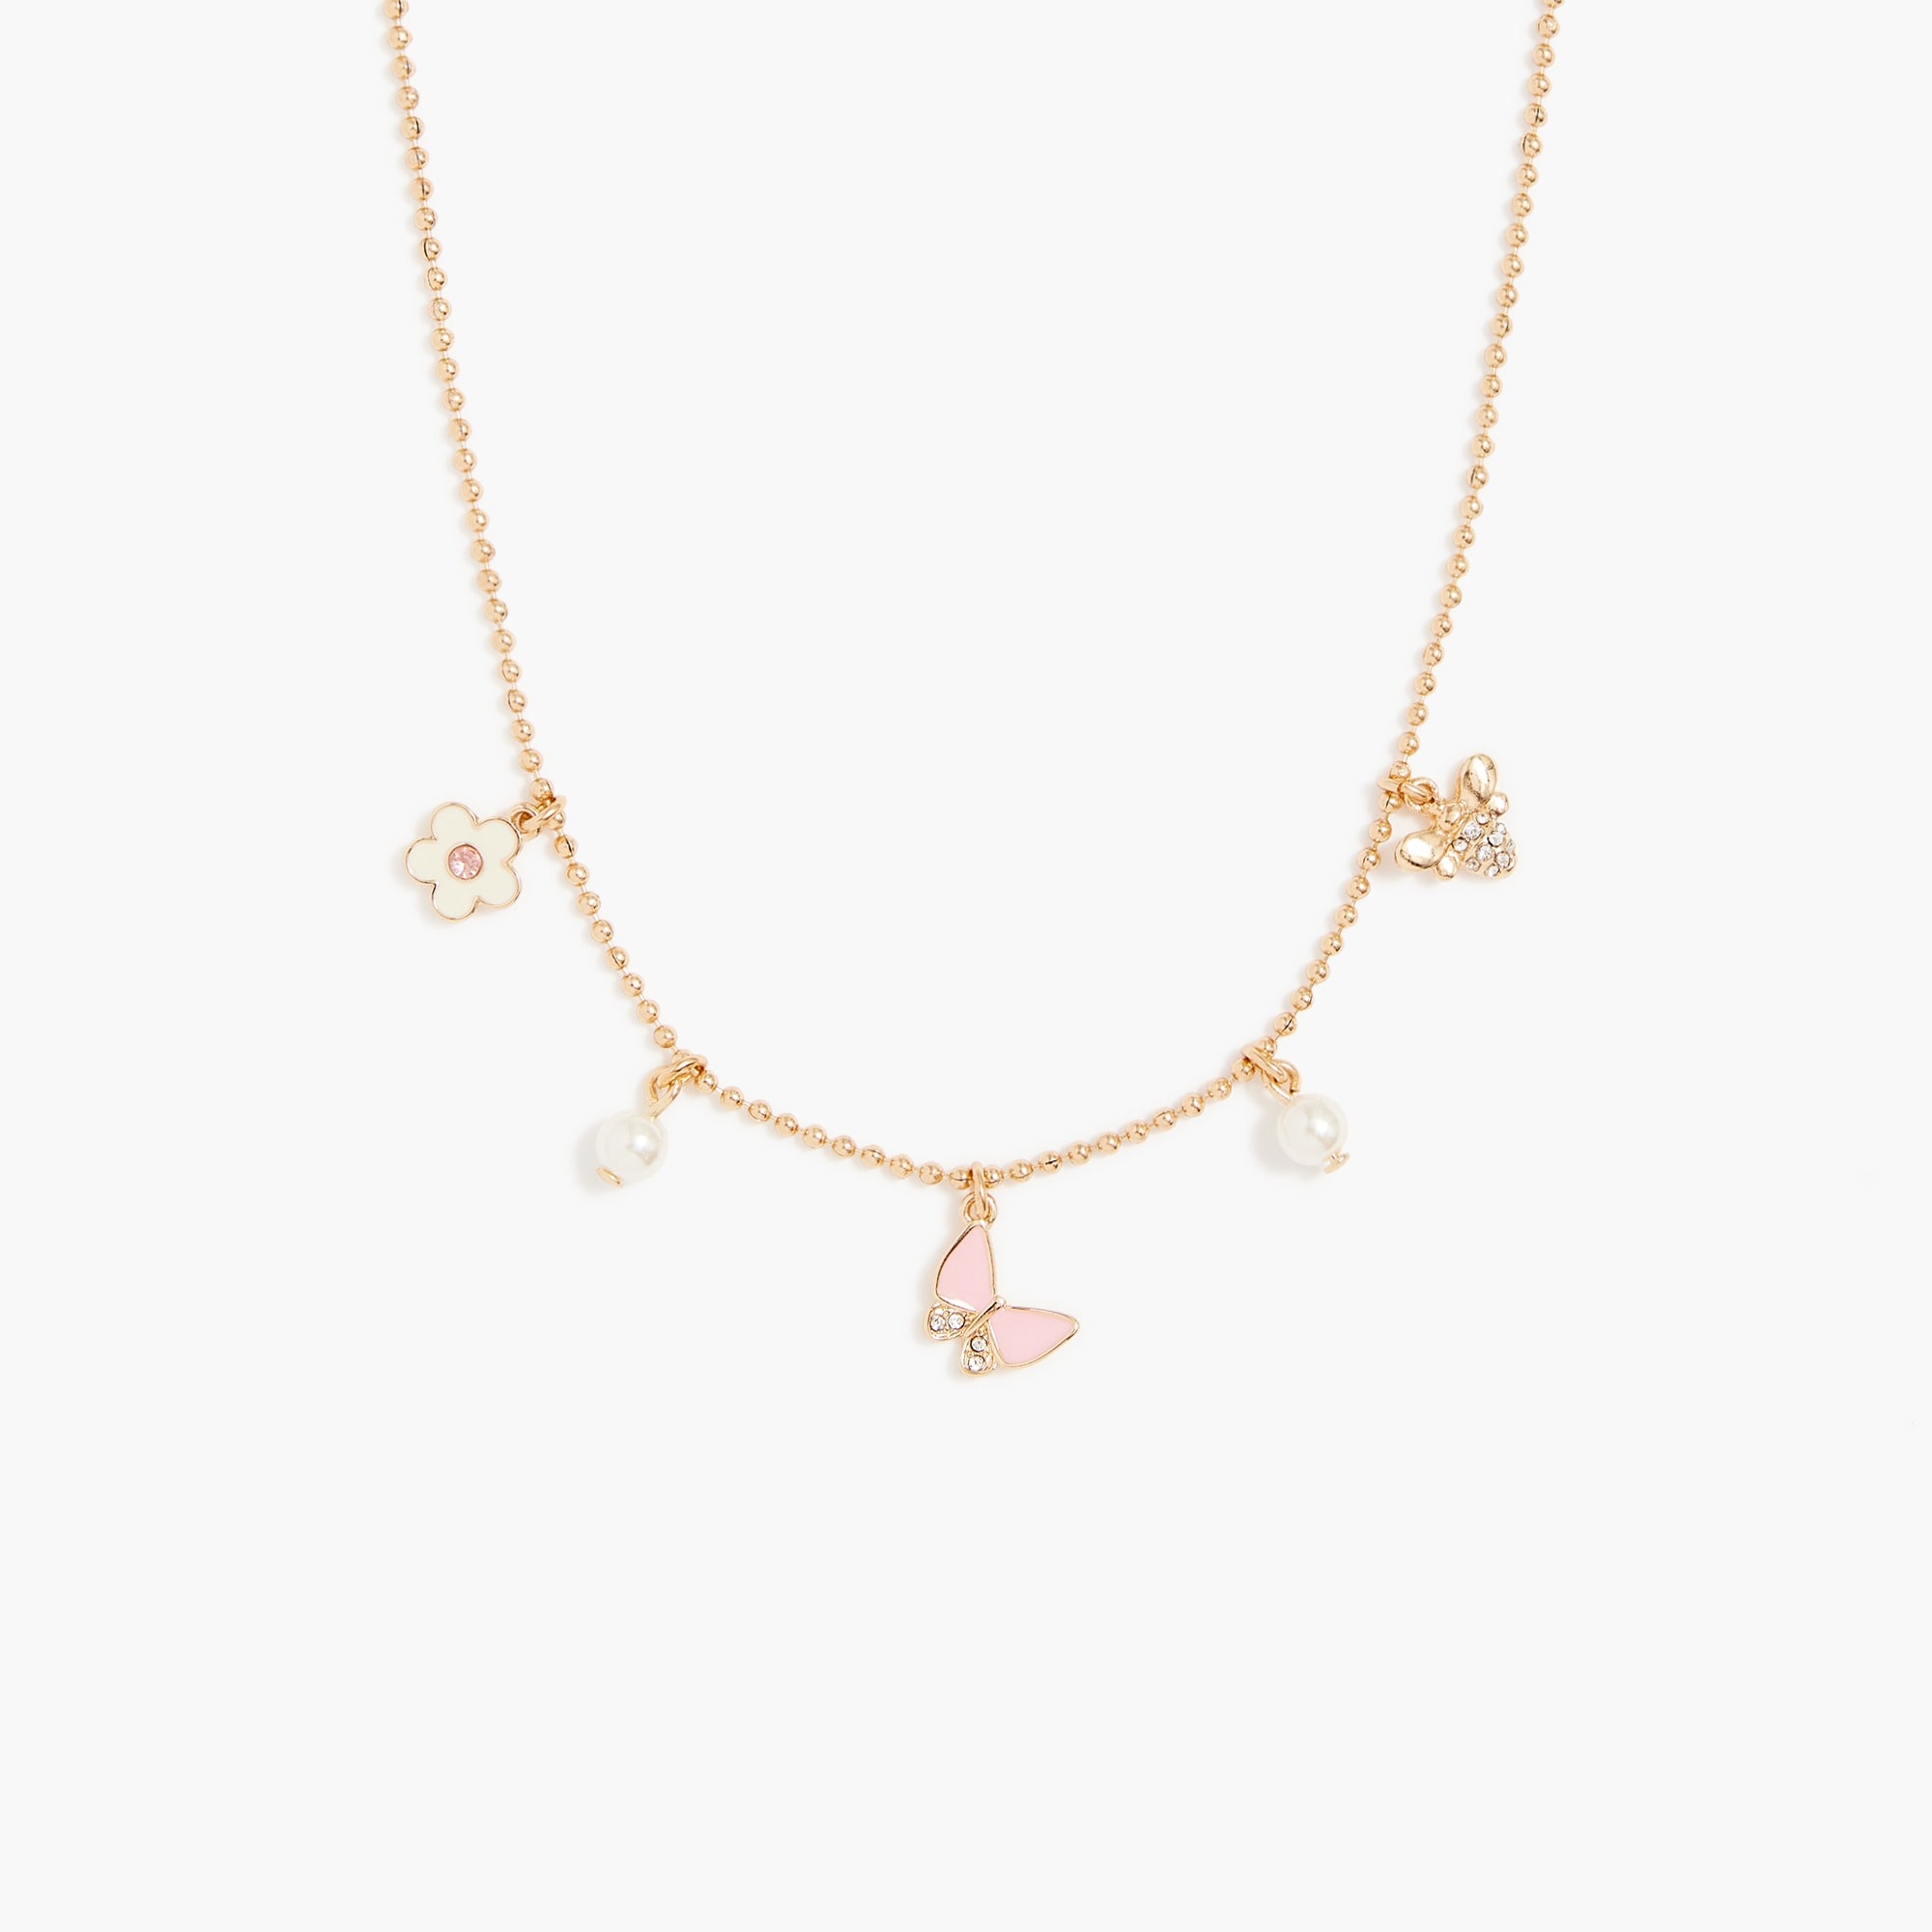 Girls' charm necklace